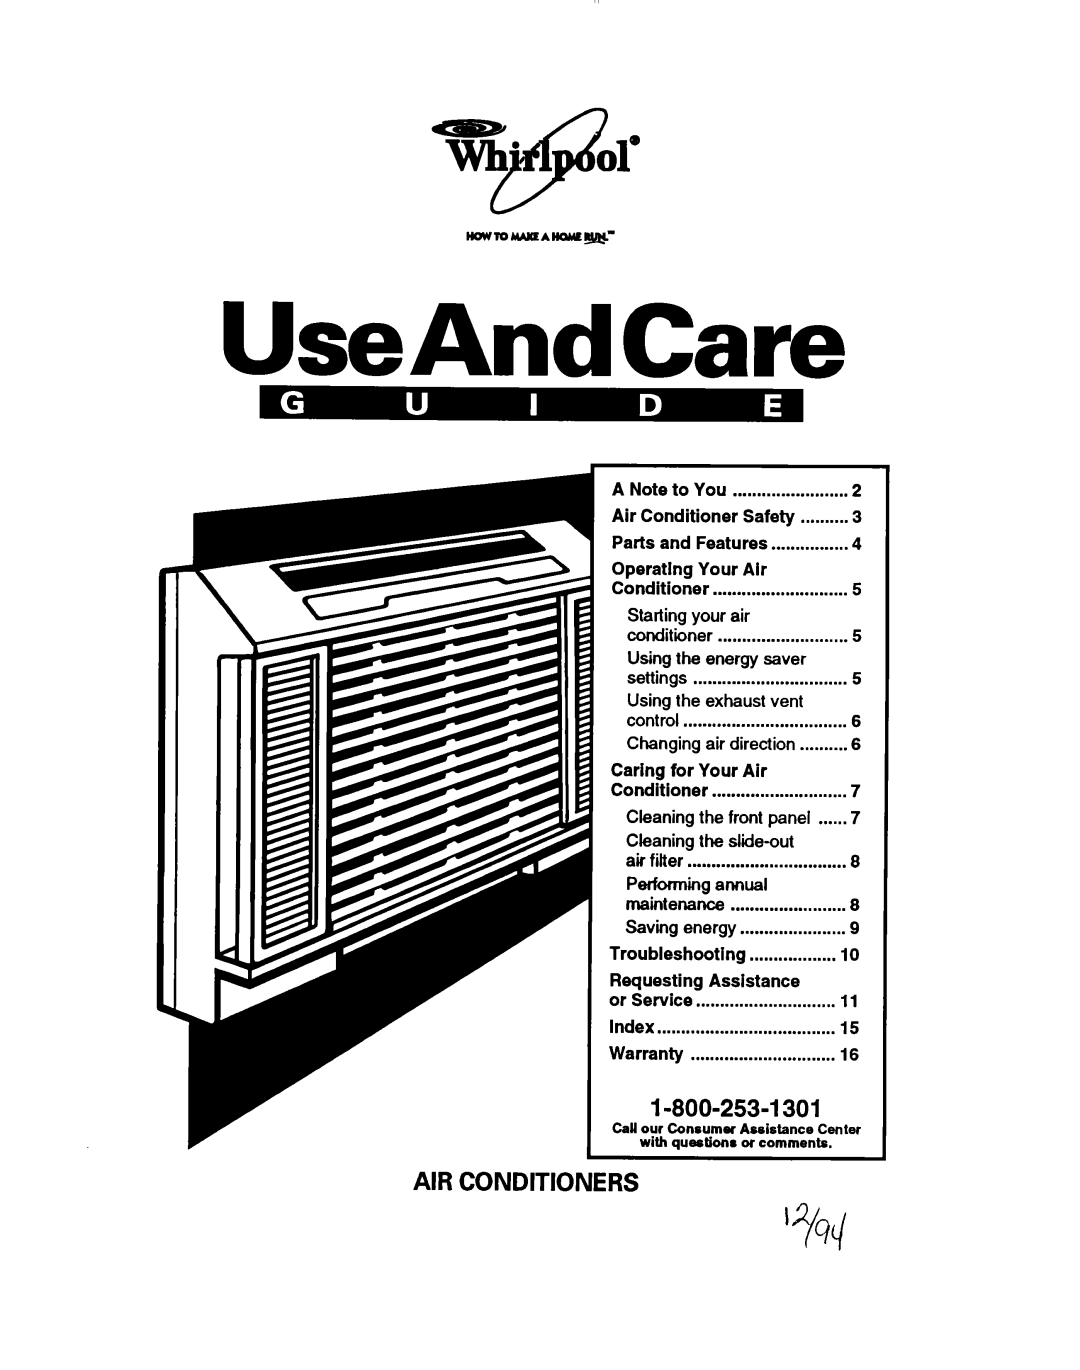 Whirlpool ACE184XD0 warranty UseAndCare, wh OS H nmvToblwfErnout~, l-800-253-1301 